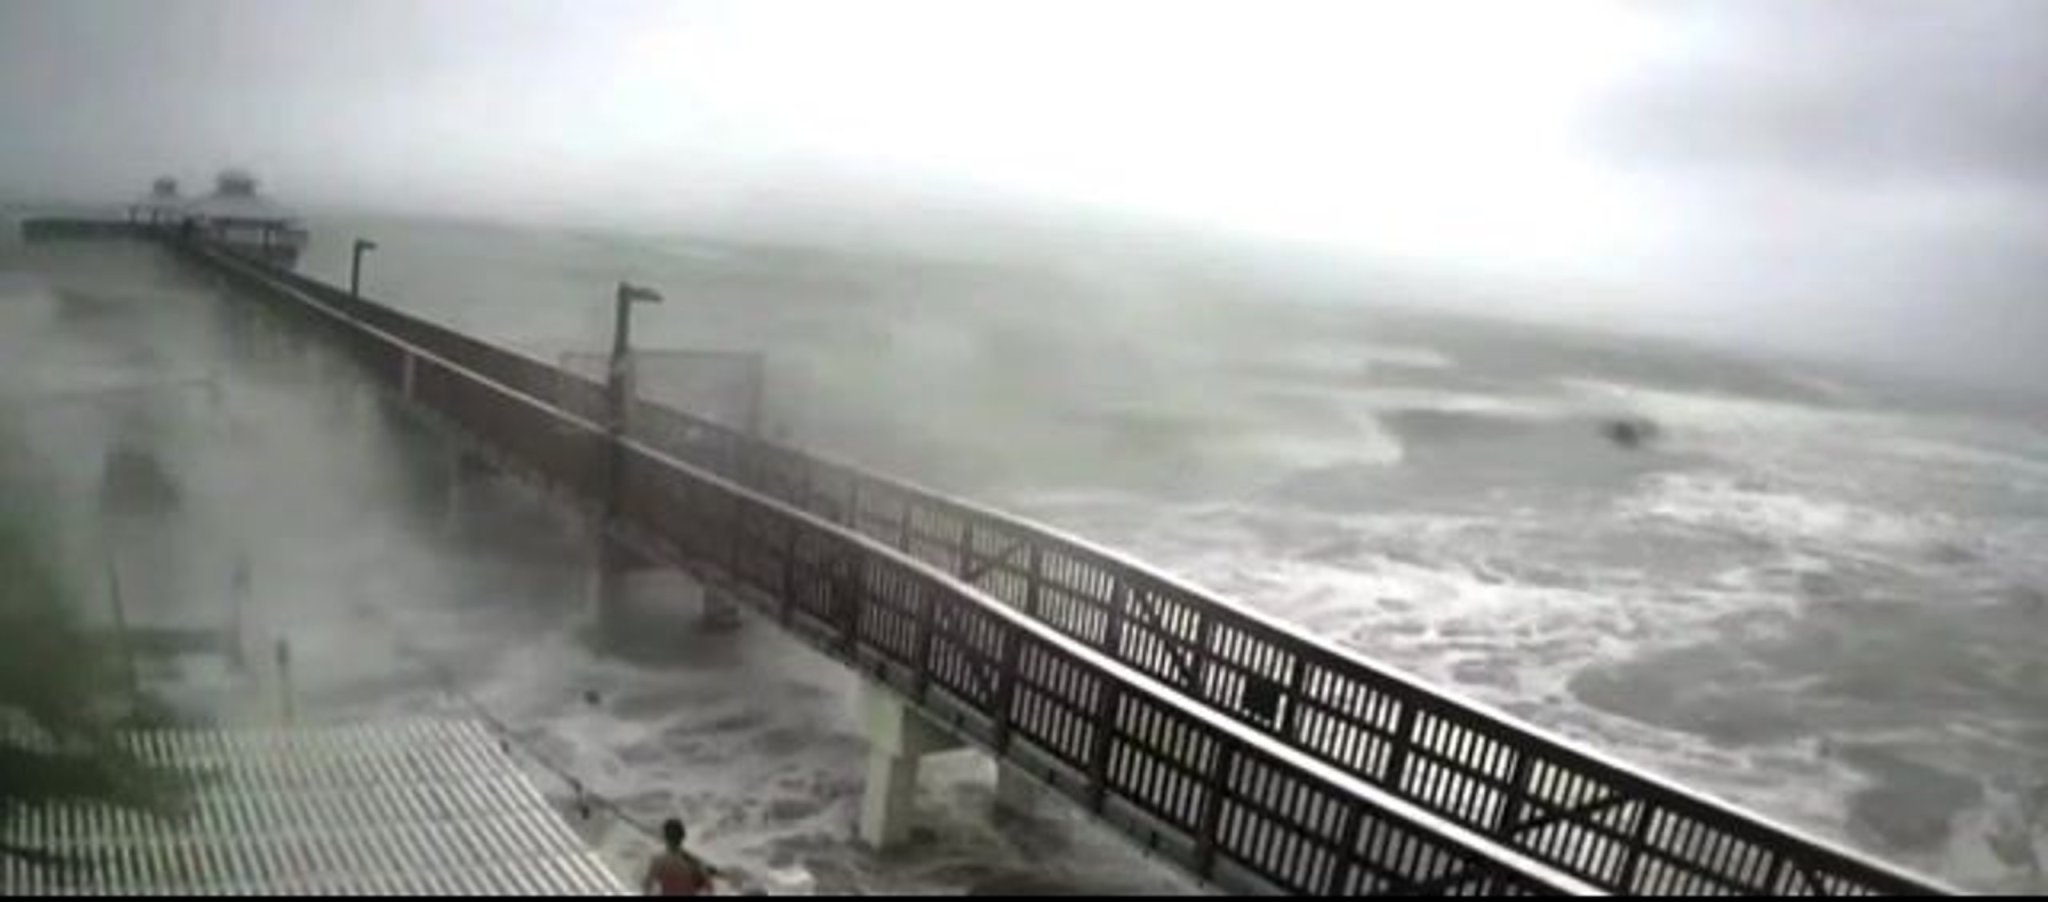 Watch the moment when a giant wave tosses a man who is inexplicably swimming in FL while Hurricane Ian makes landfall.